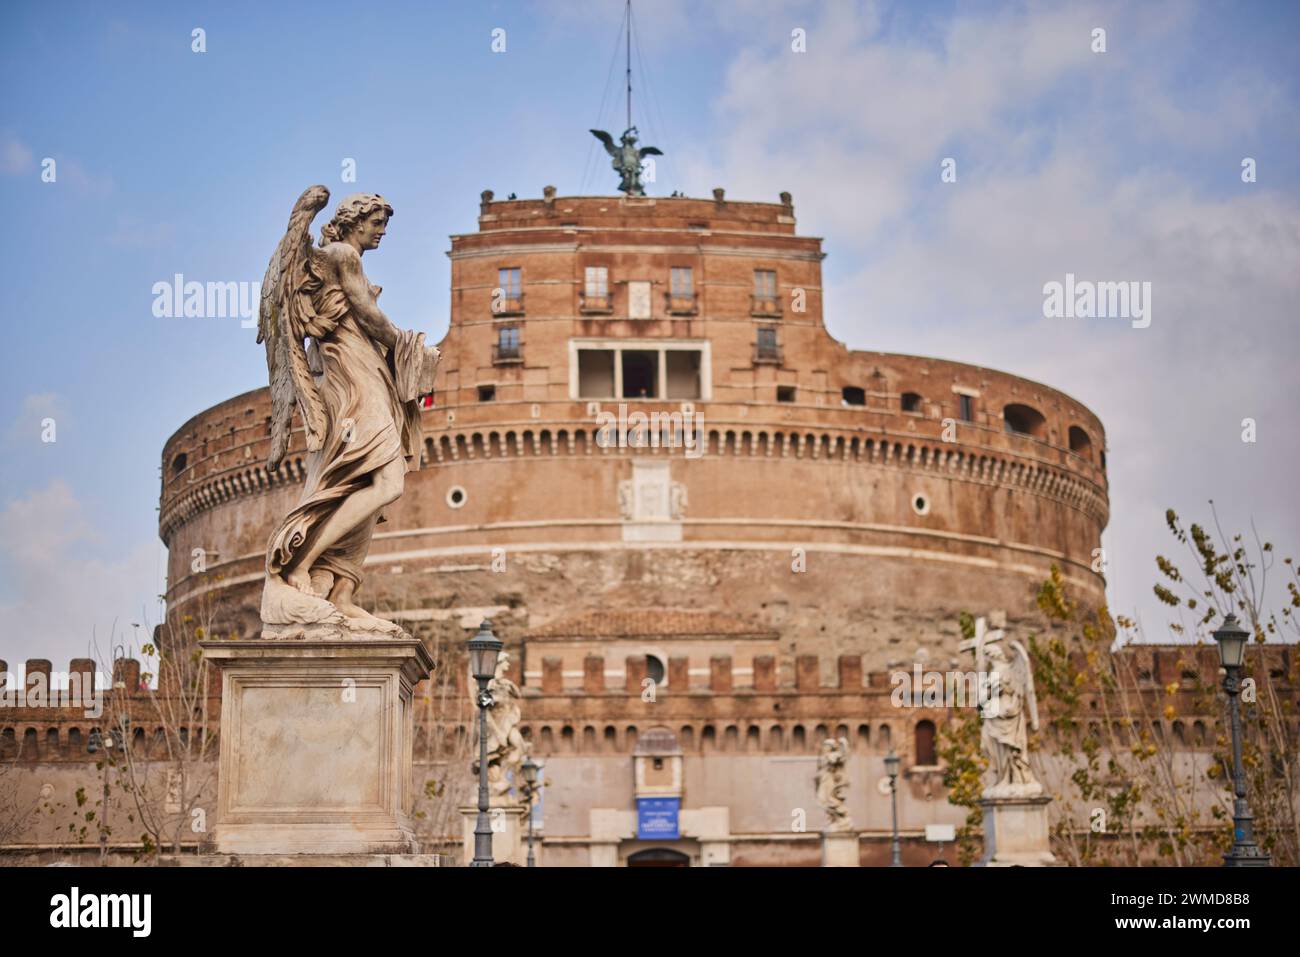 Mausoleum of Hadrian, also known as Castel Sant'Angelo, Castle of the Holy Angel in Rome, Italy. Stock Photo